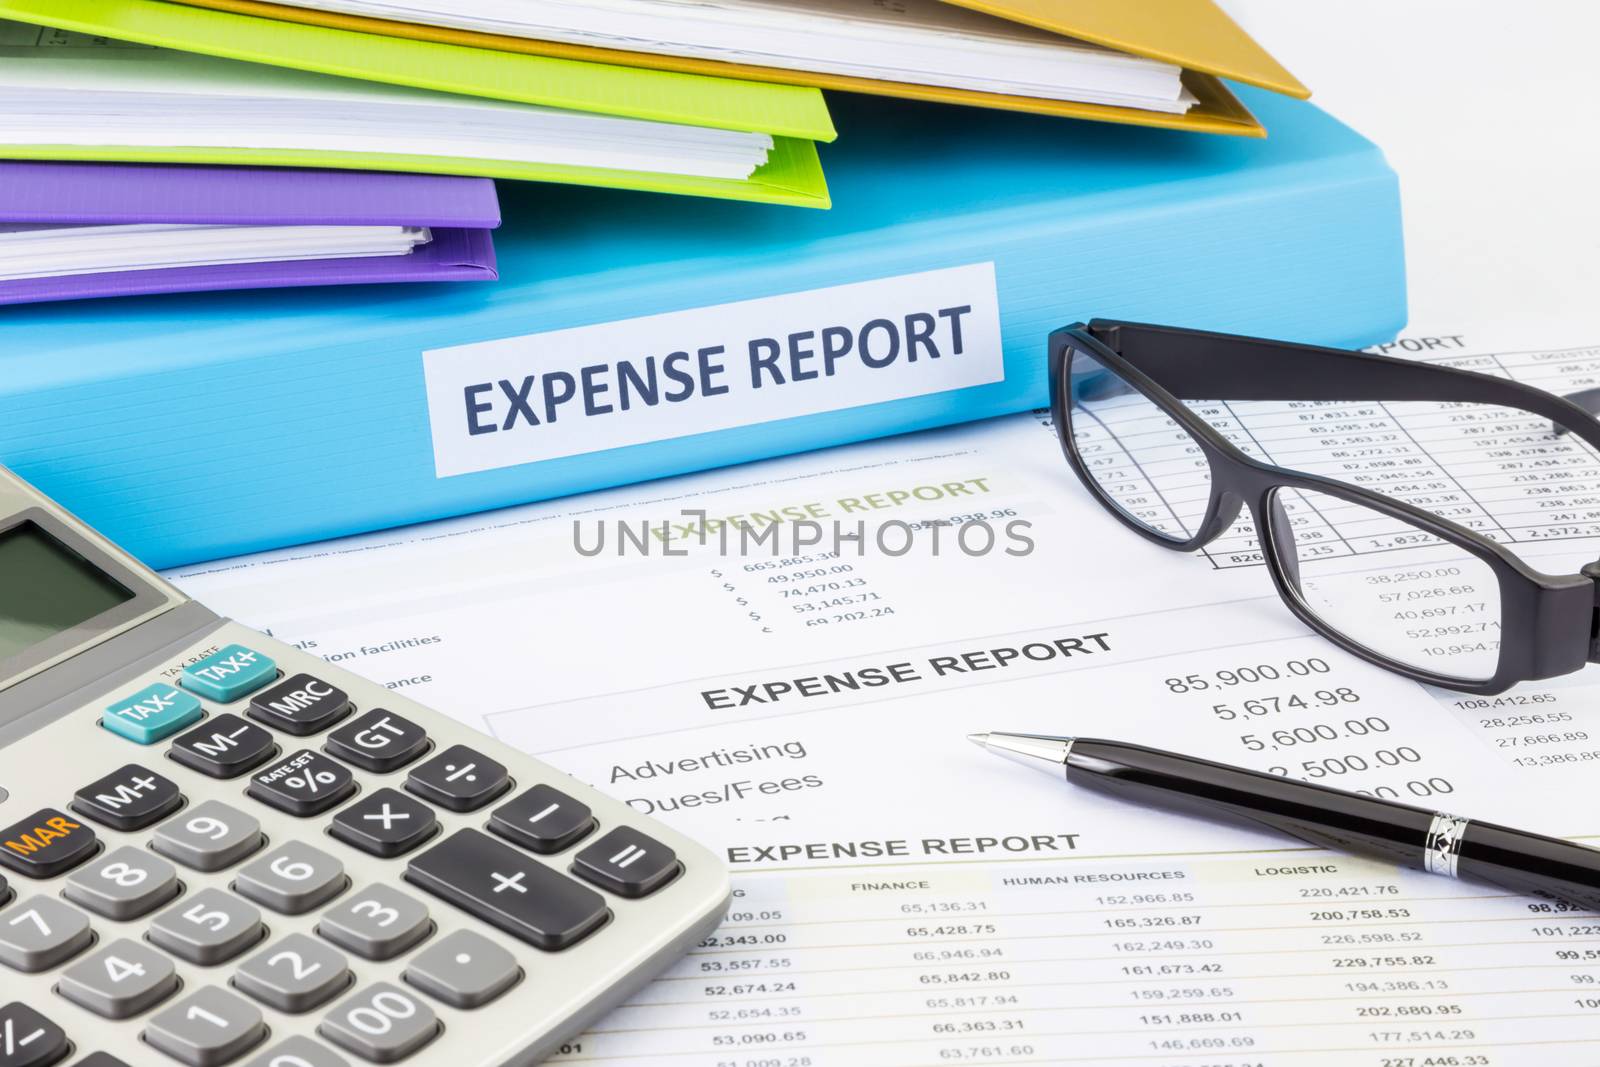 Business expense report binder with financial documents and calculator